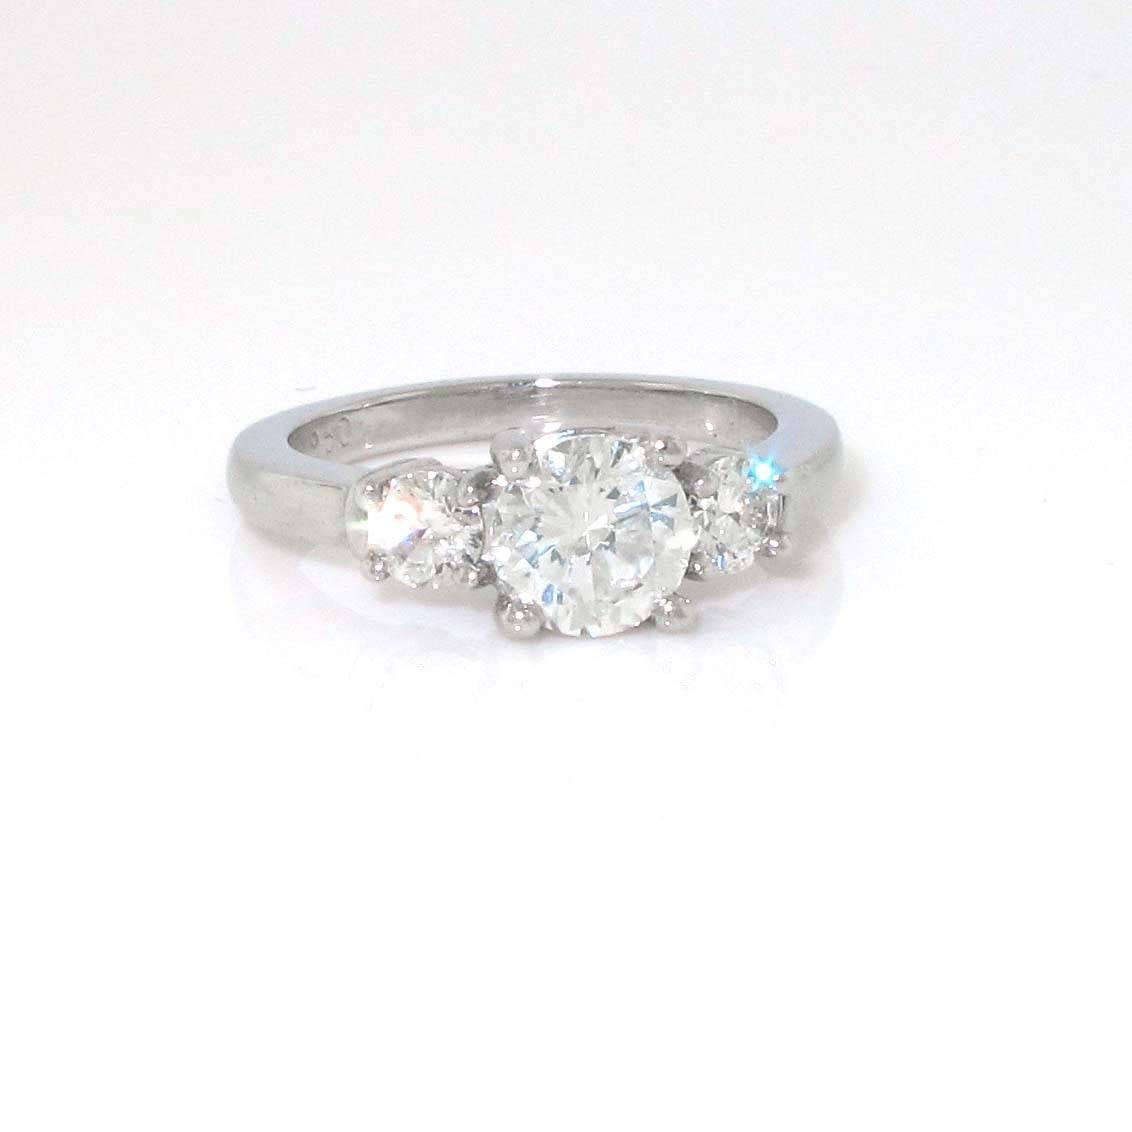 This is the greatest value in engagement rings. A .95ct white diamond center stone with approximately .34ct of white diamond side stones. The colors of the 3 stones match perfectly and the clarity is eye clean. This is a great ring and it looks even